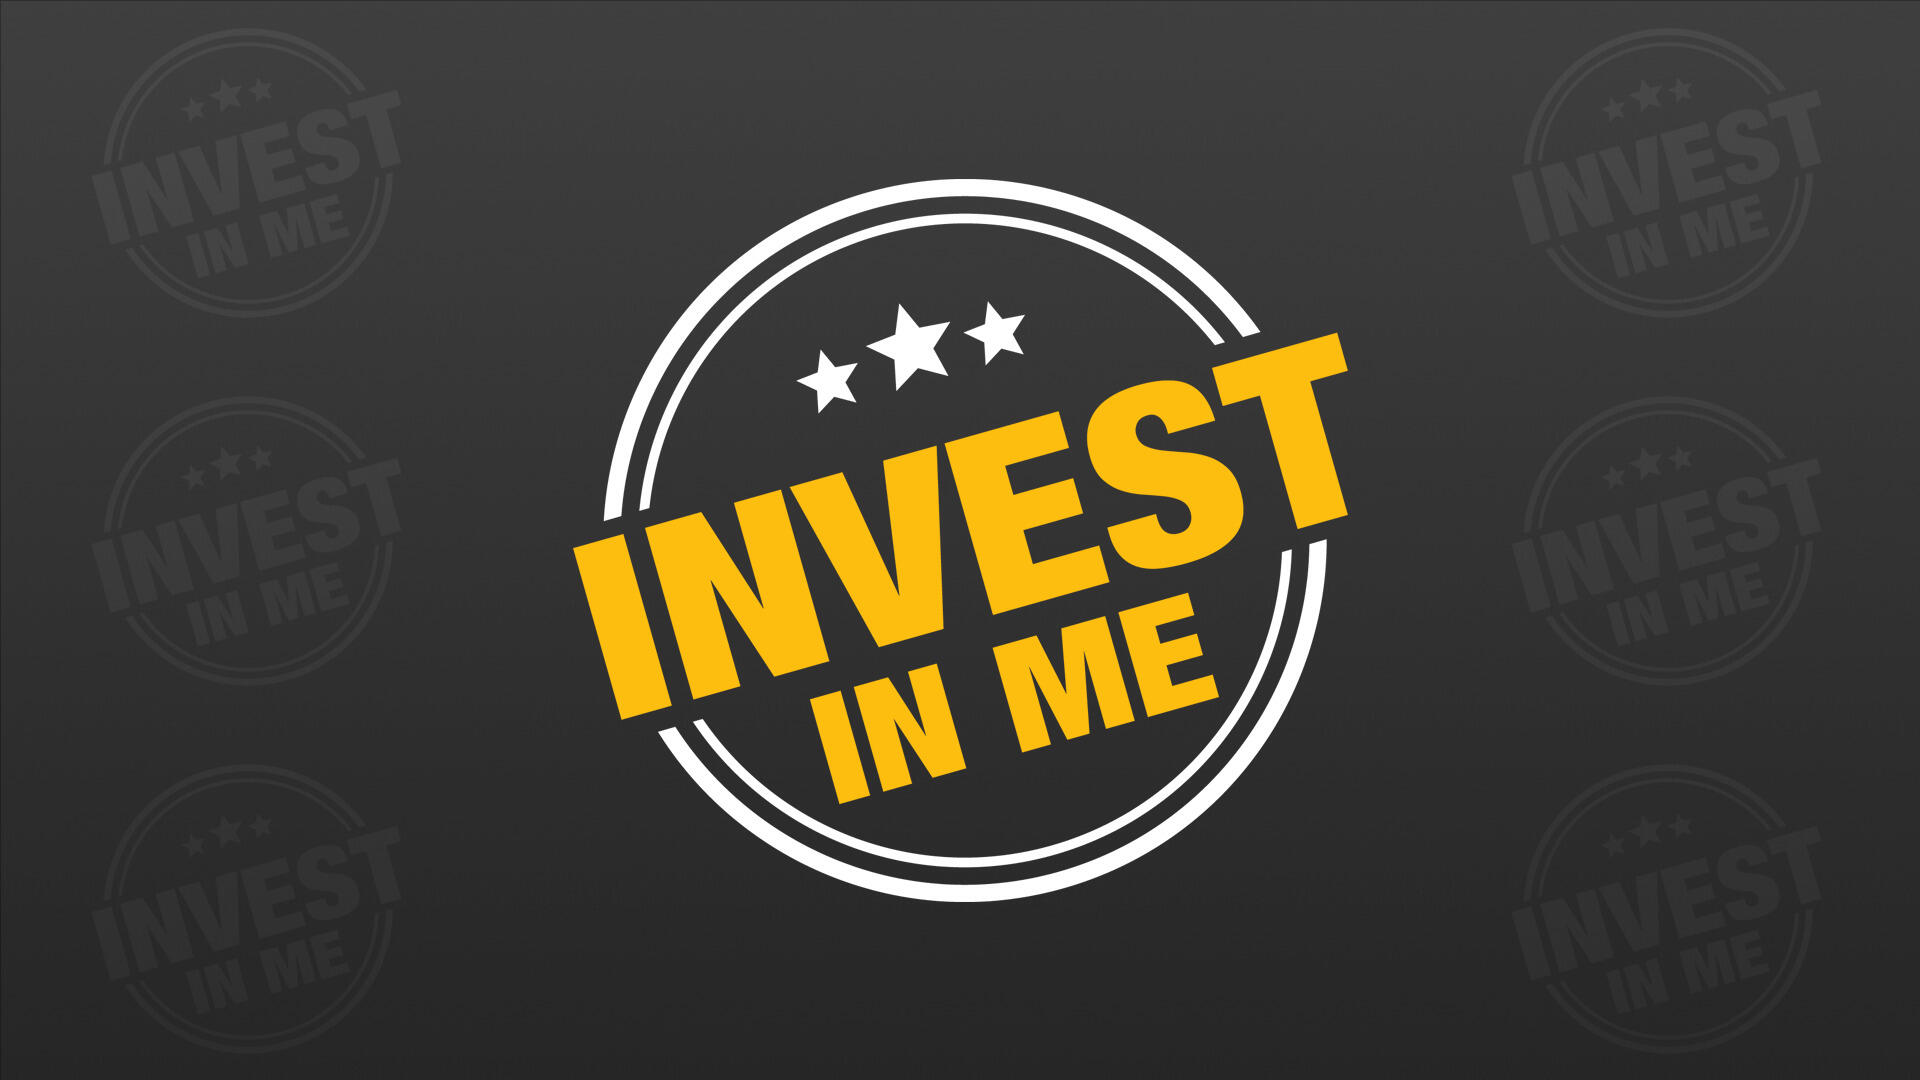 A white circle with yellow text in the middle that says \"INVEST IN ME\"